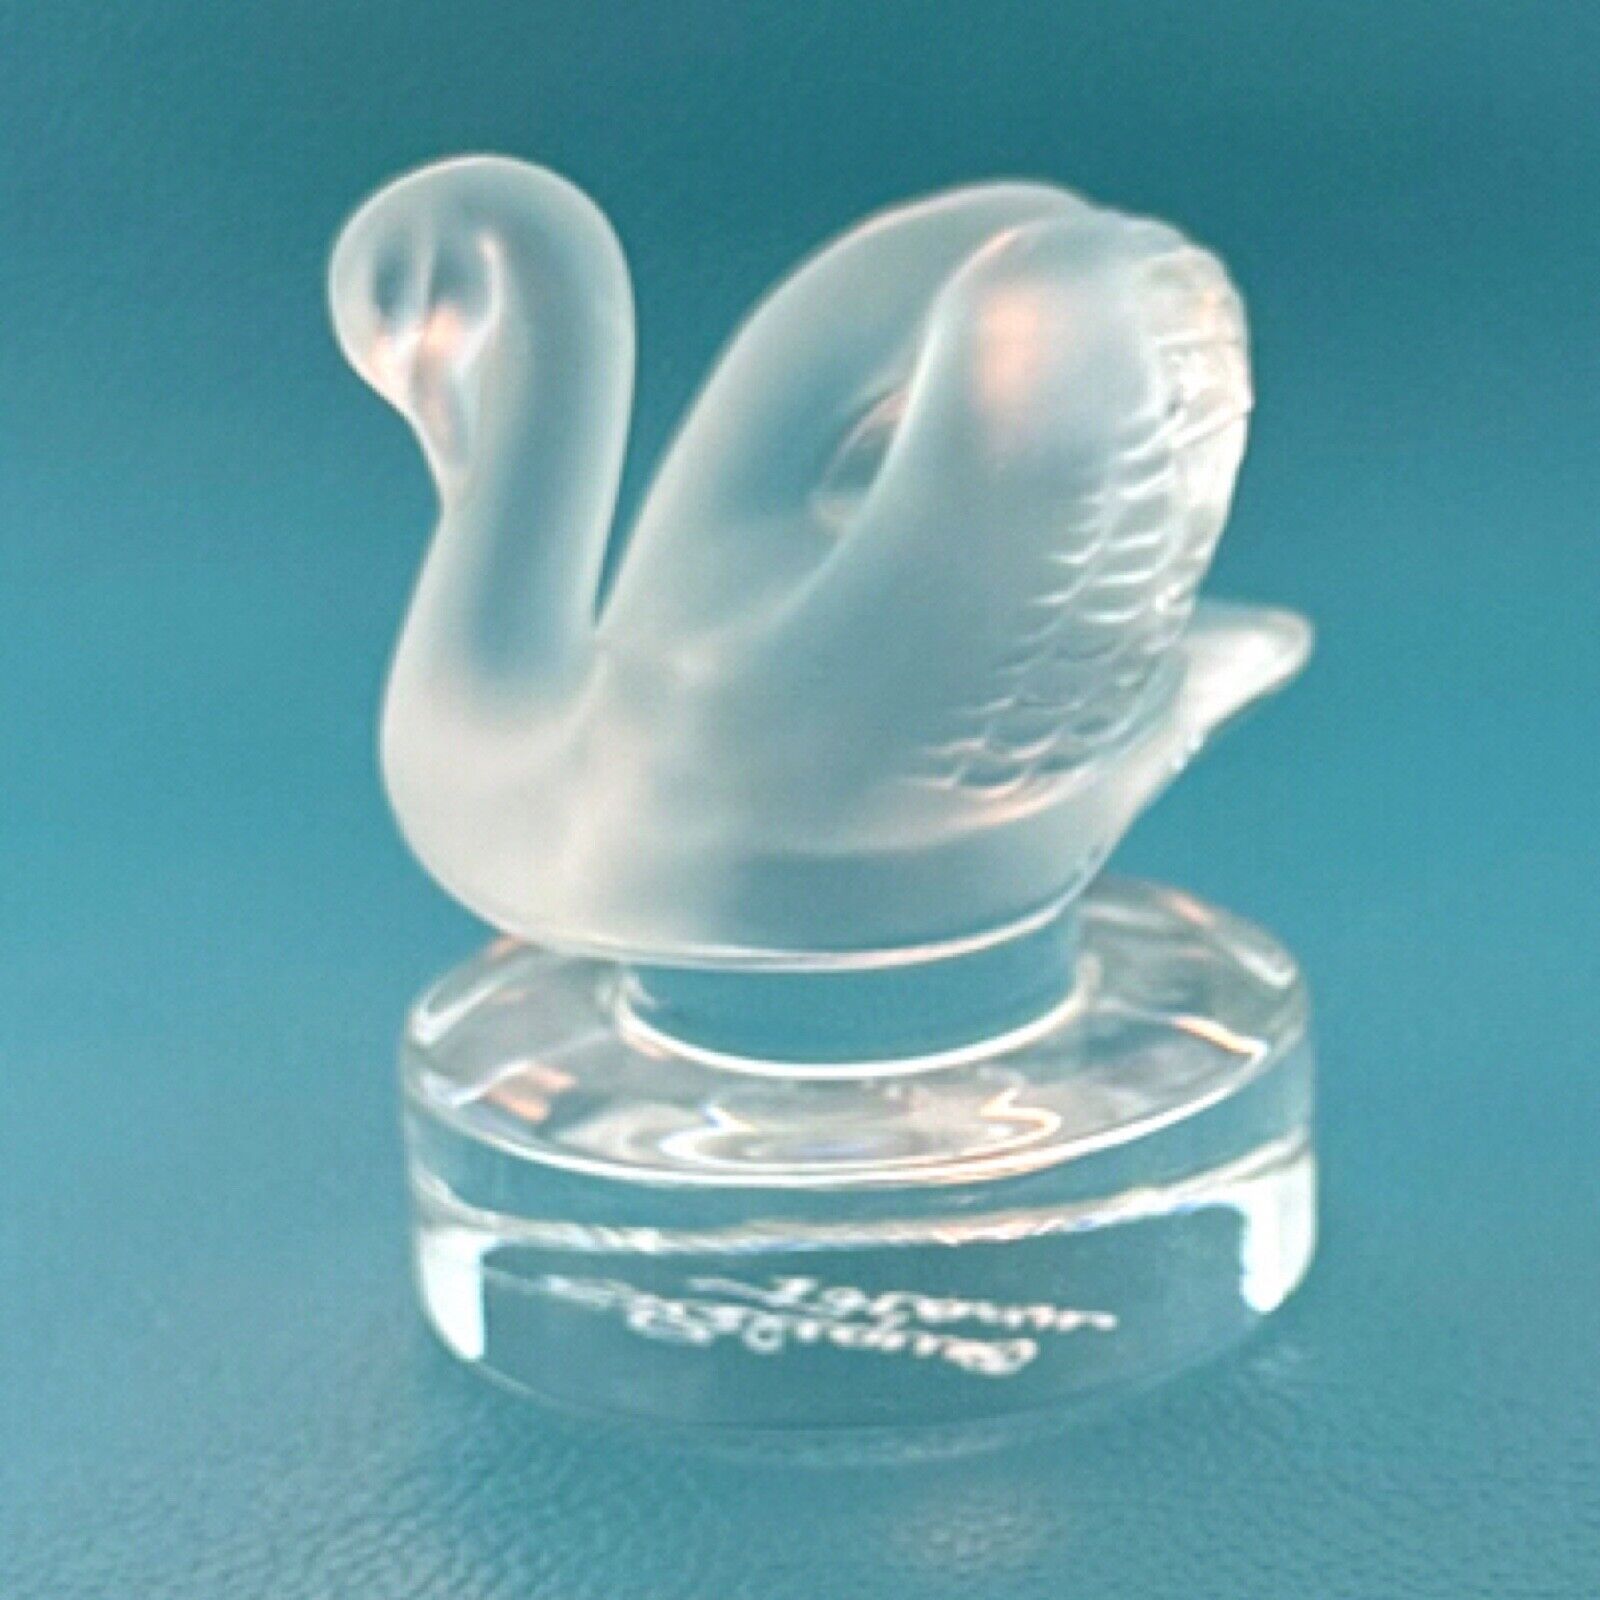 LALIQUE France Crystal Swan Figurine Signed Vintage Collectable